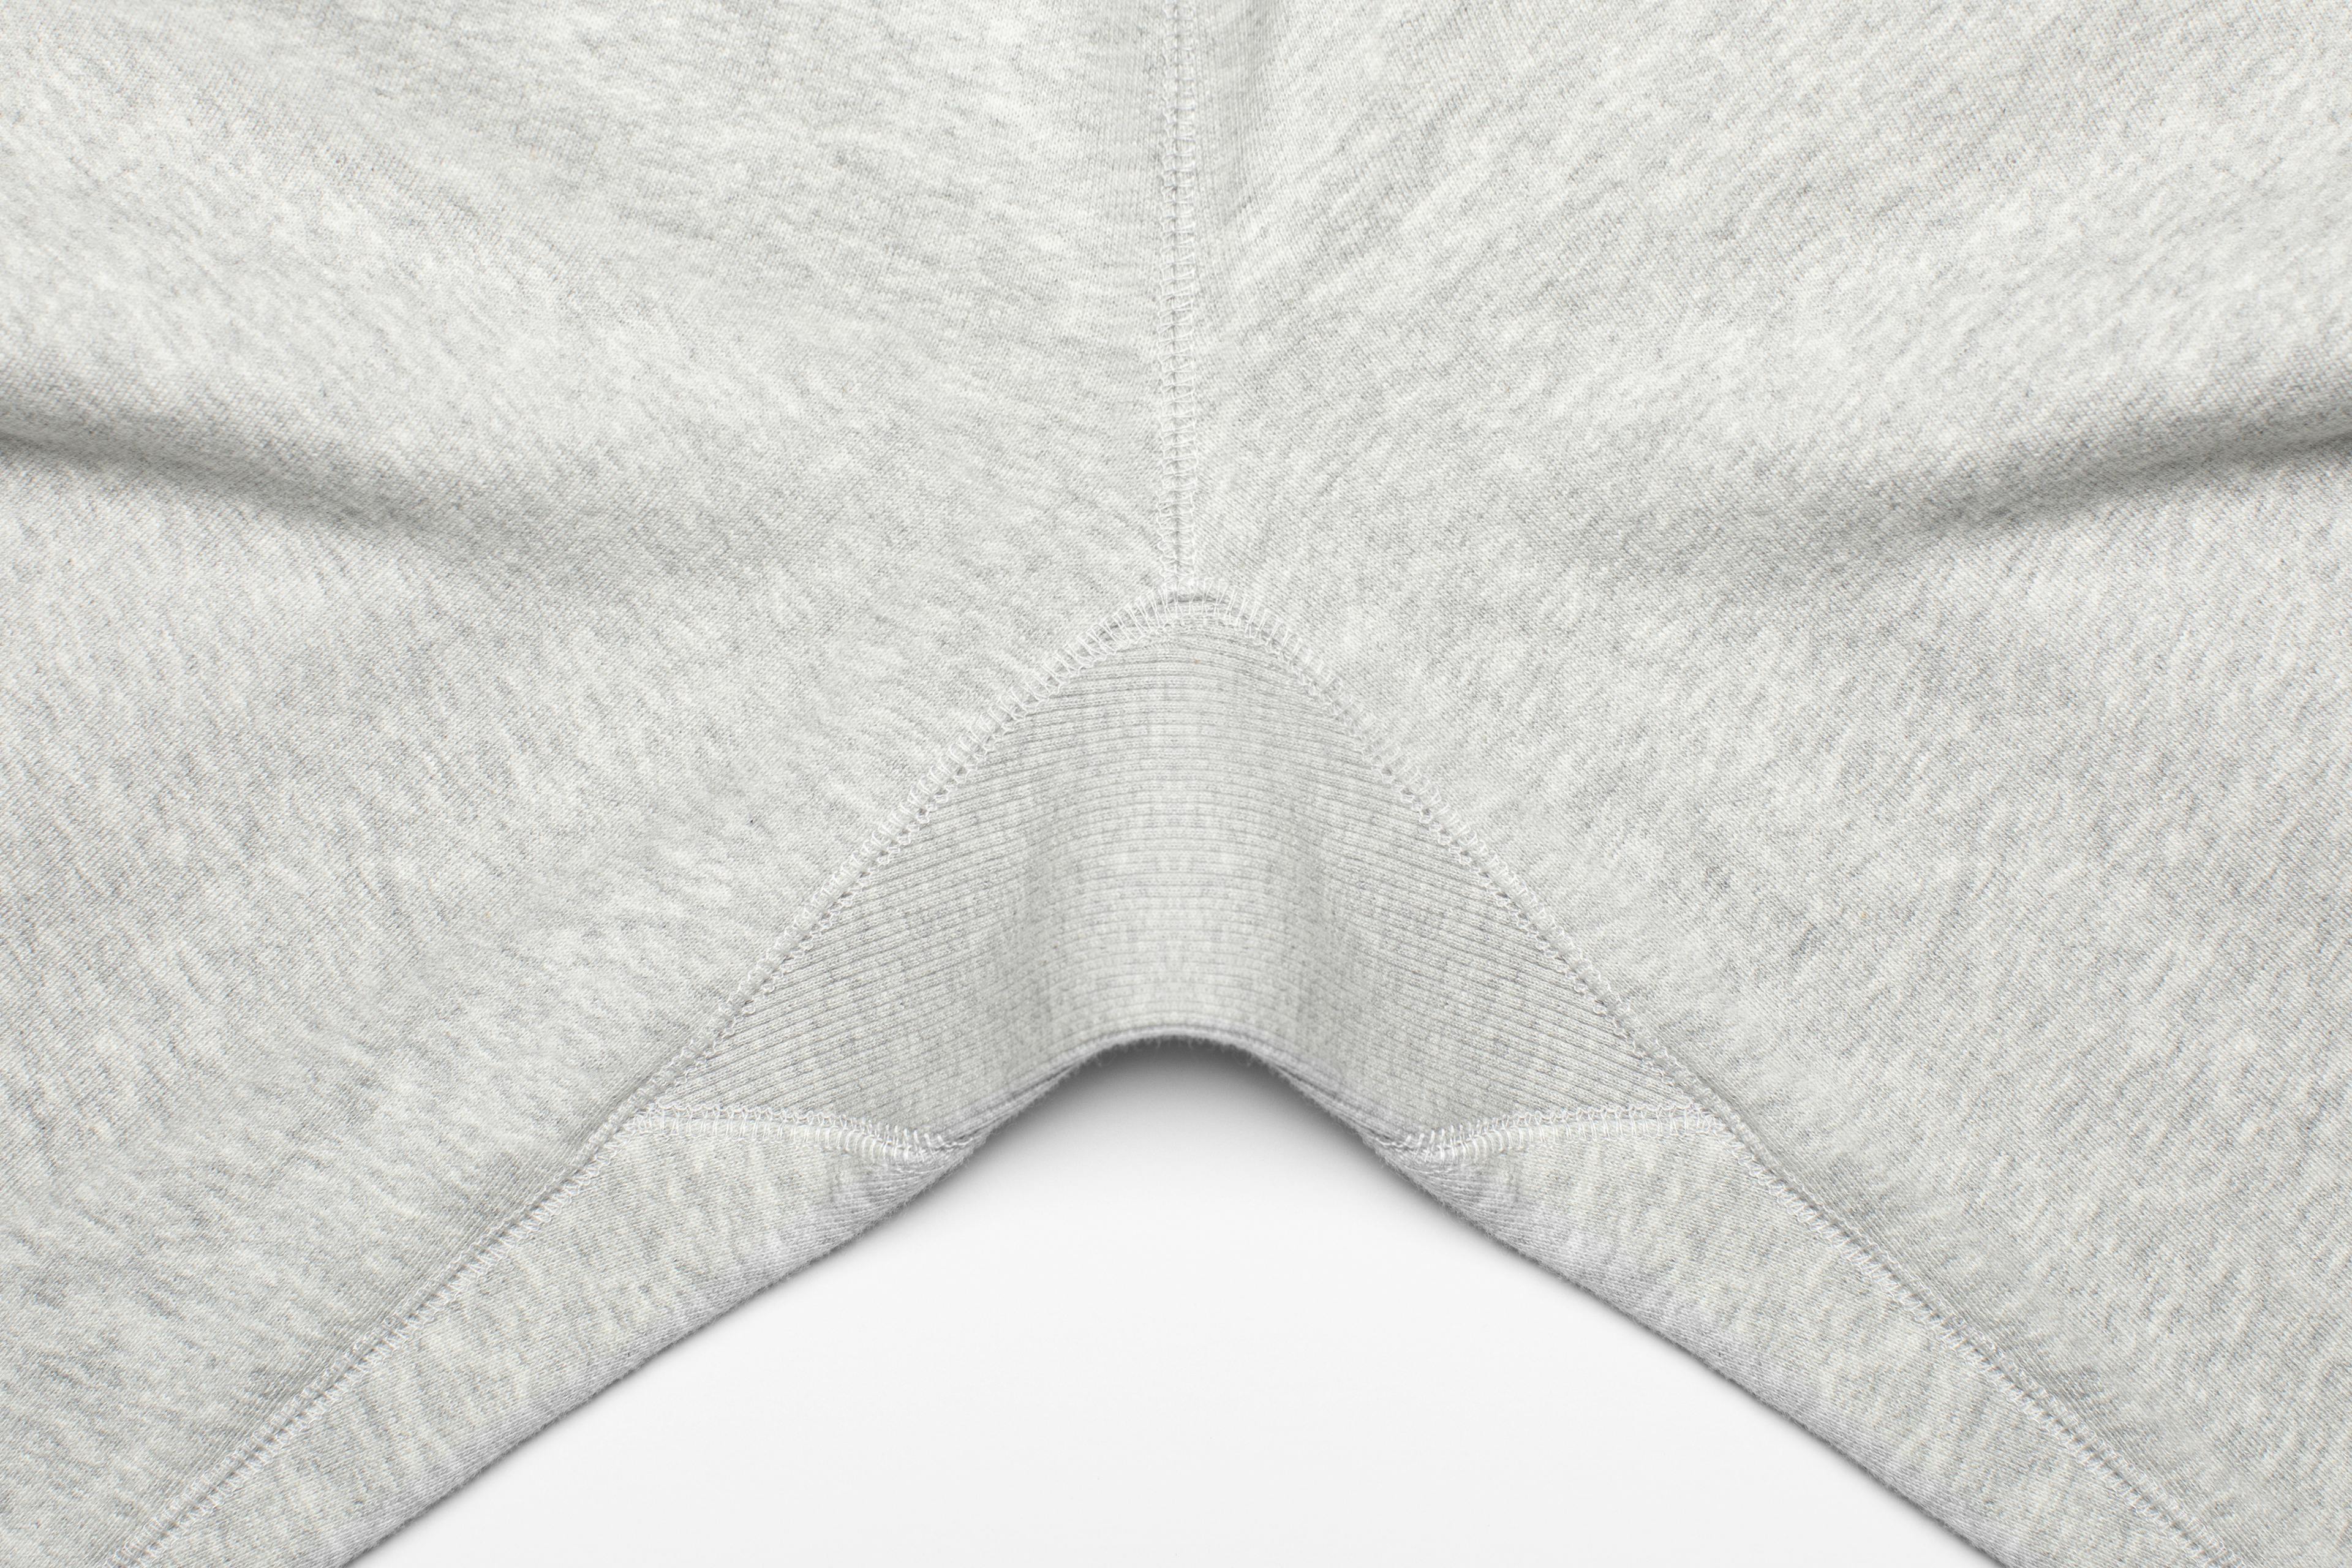 PDP Image: Lounge Sweatpants (M's Fit - Grey) - 3:2 - Inner, Zoom